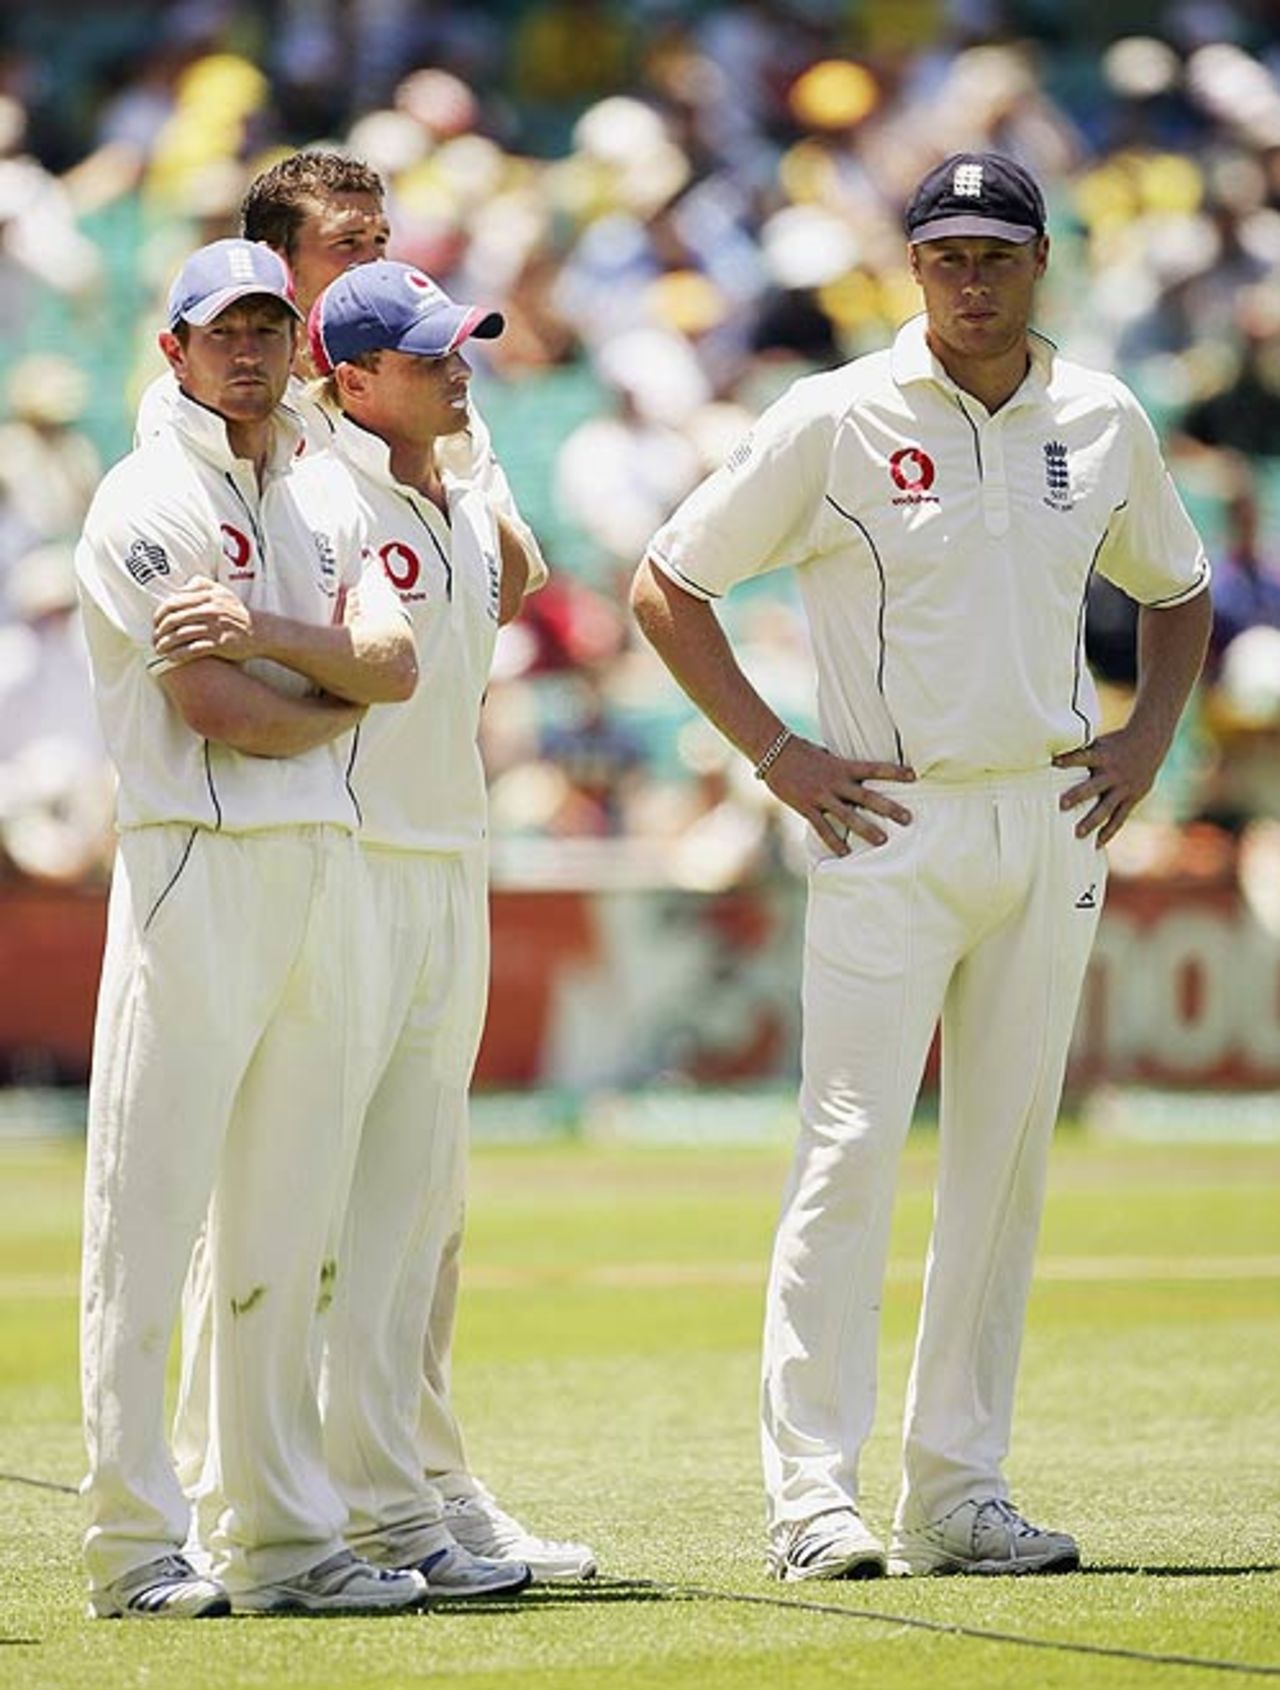 Andrew Flintoff, Paul Collingwood and Ian Bell reflect on what went wrong, Australia v England, 5th Test, Sydney, January 5, 2007